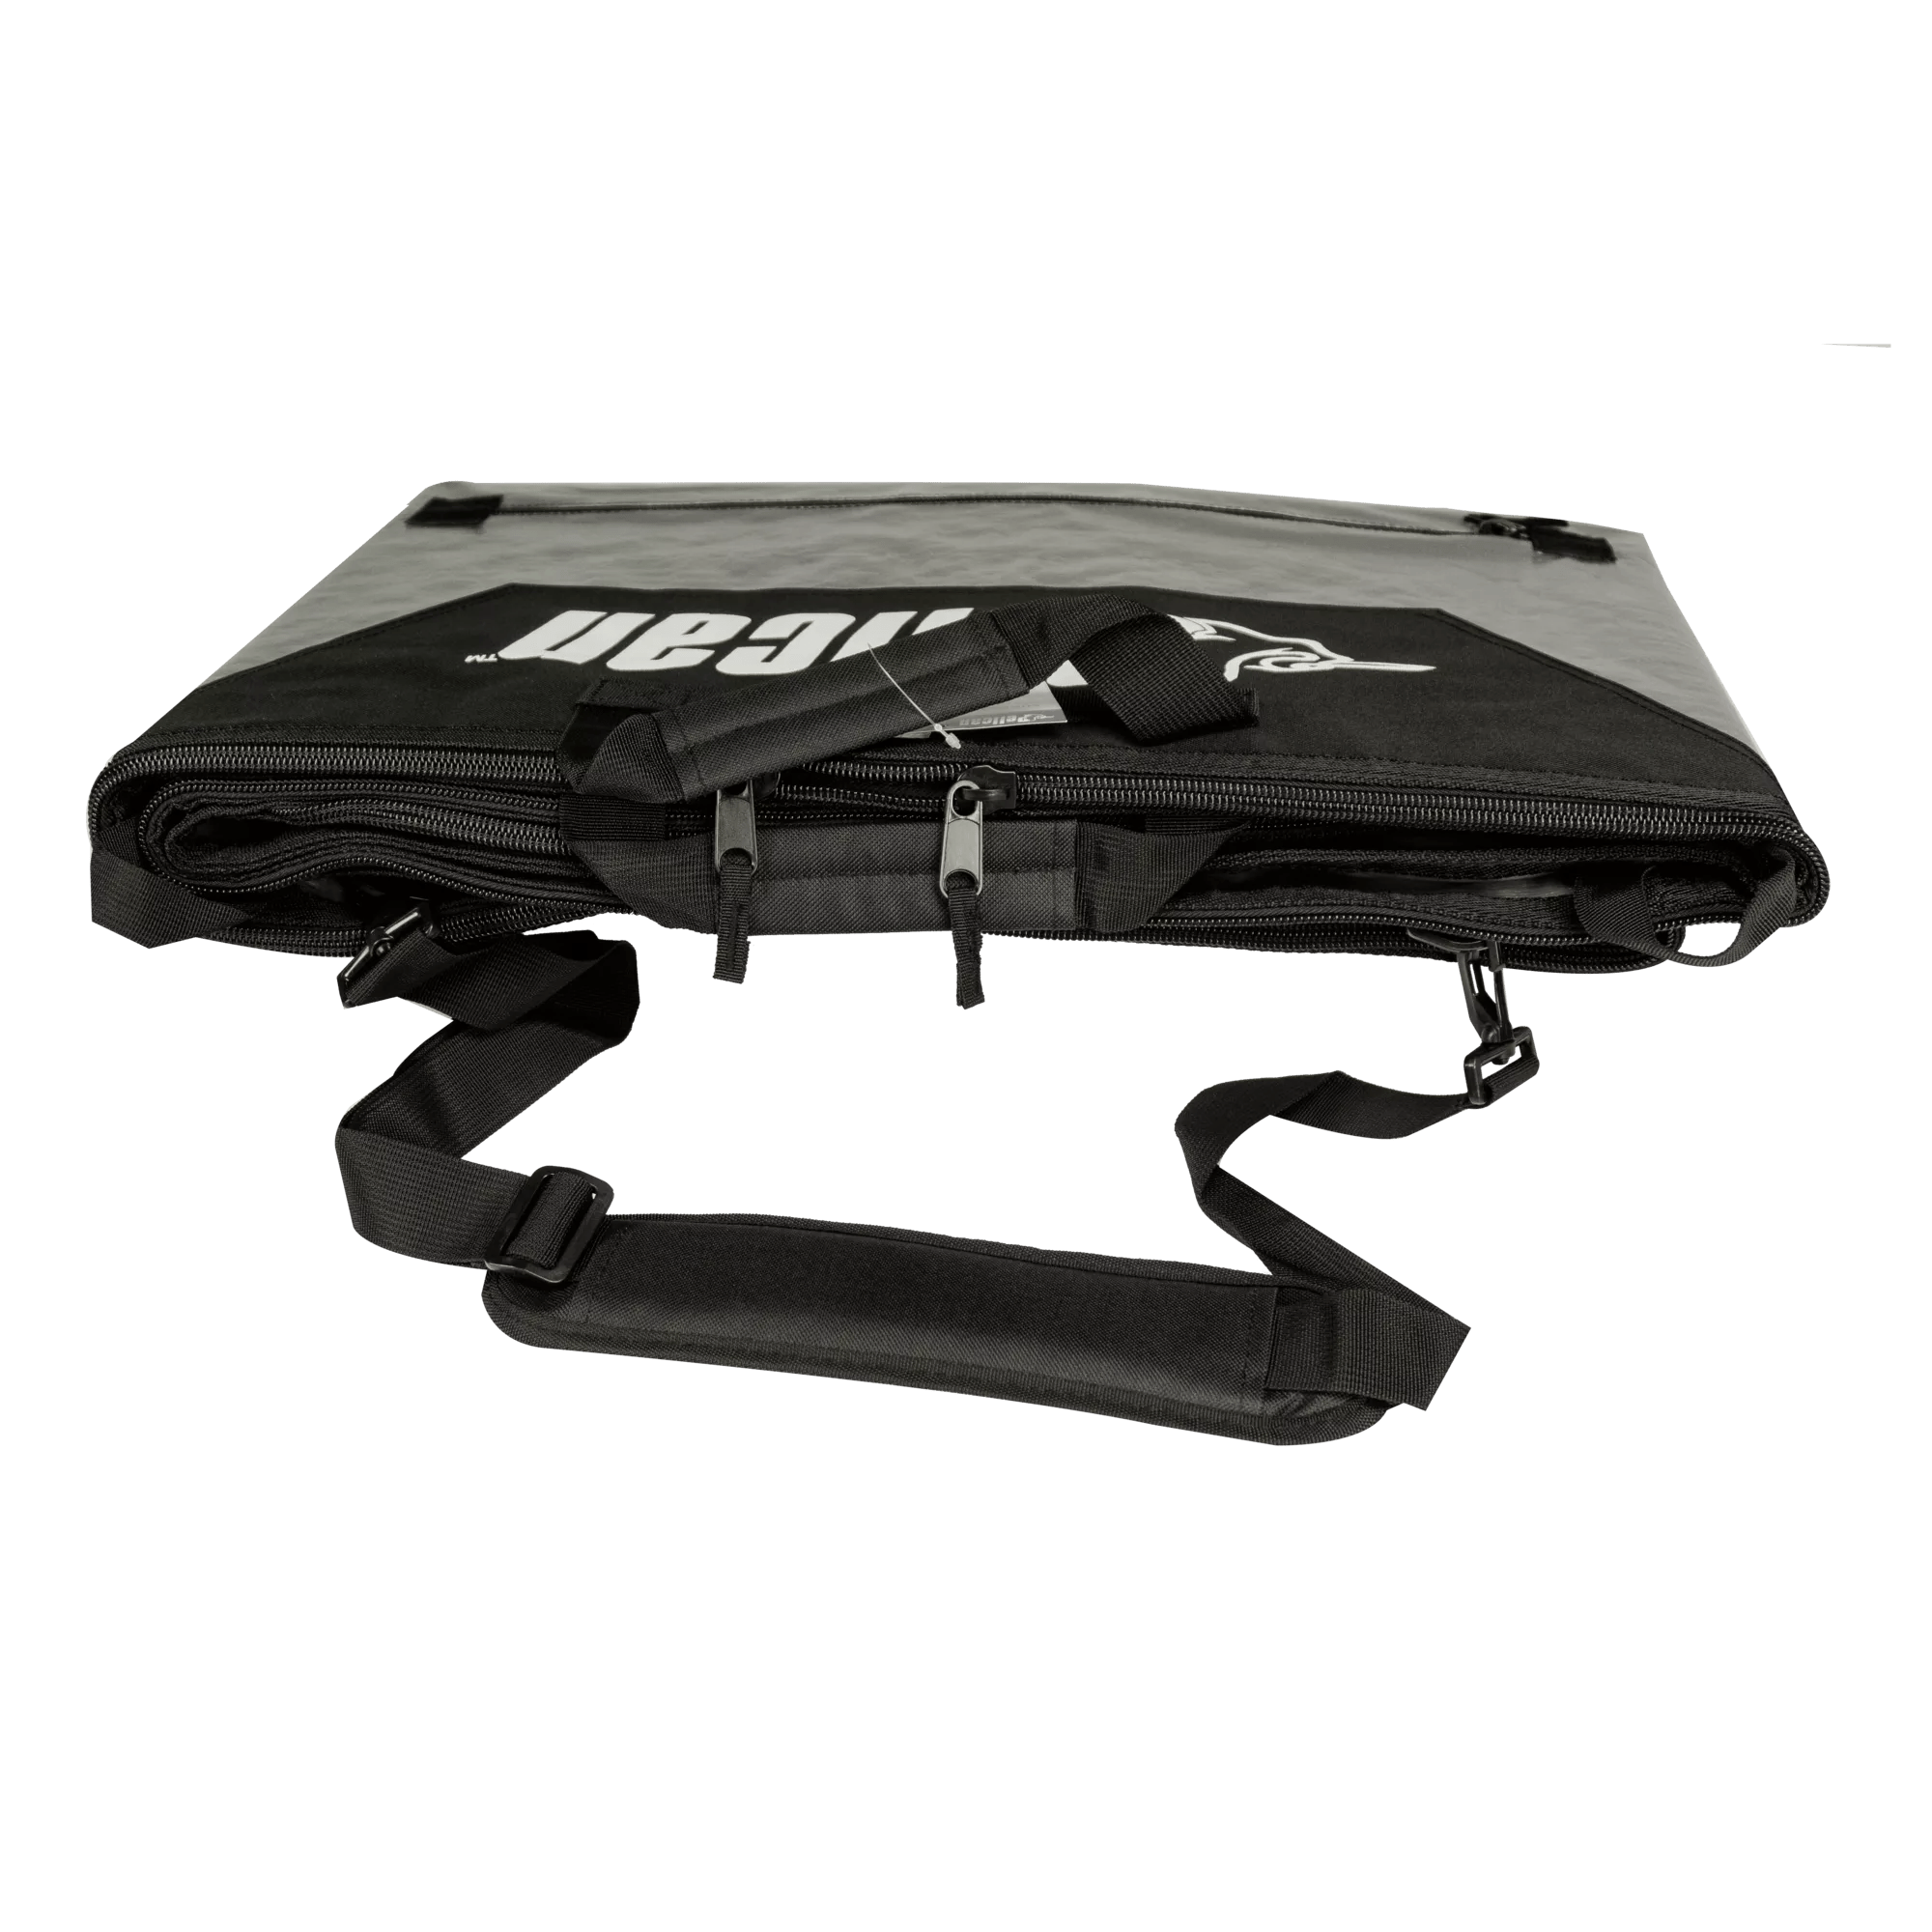 PELICAN - Stand Up Paddle Board Bag - Grey - PS1458 - SIDE